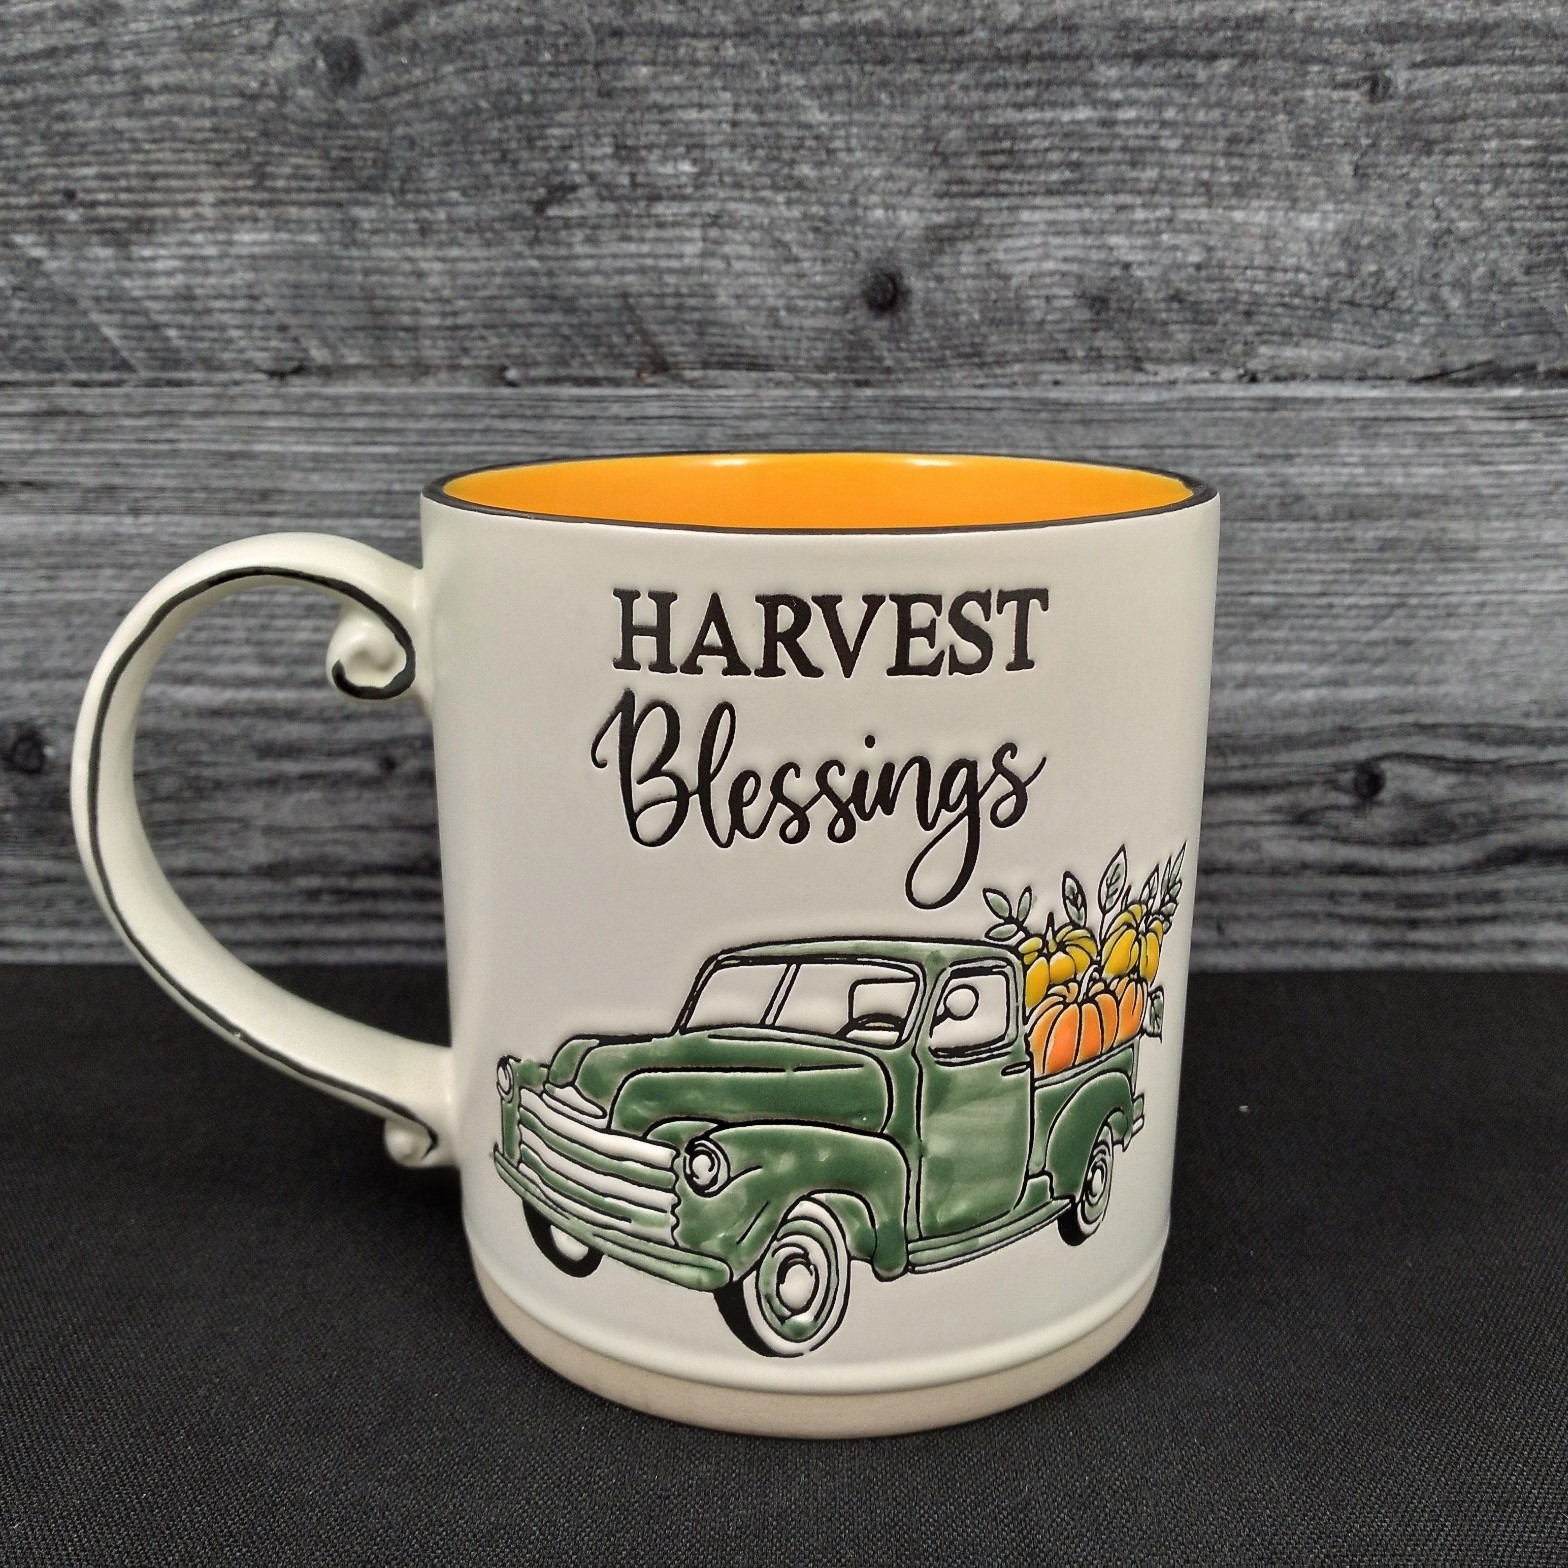 This Pumpkin Harvest Truck Coffee Mug Fall Autumn Beverage Tea Cup 21oz 621ml is made with love by Premier Homegoods! Shop more unique gift ideas today with Spots Initiatives, the best way to support creators.